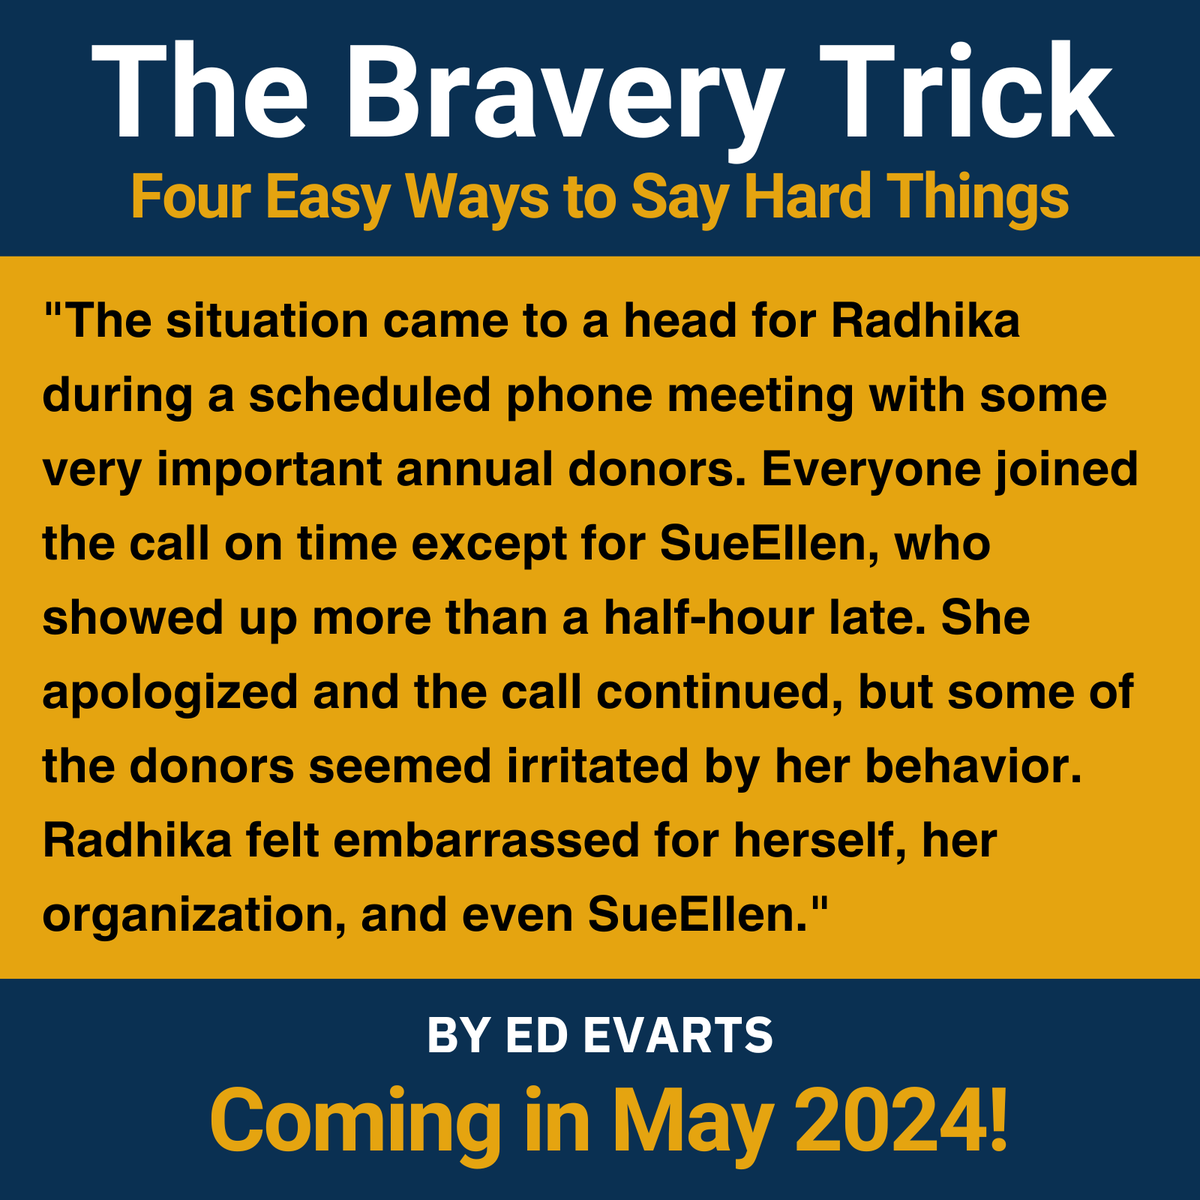 #workplace #bravery #booklaunch #thebraverytrick #thebraverytrickbook #booksbyedevarts #edevartsexcellius #excelliusleadershipcoaching #leadershipcoaching